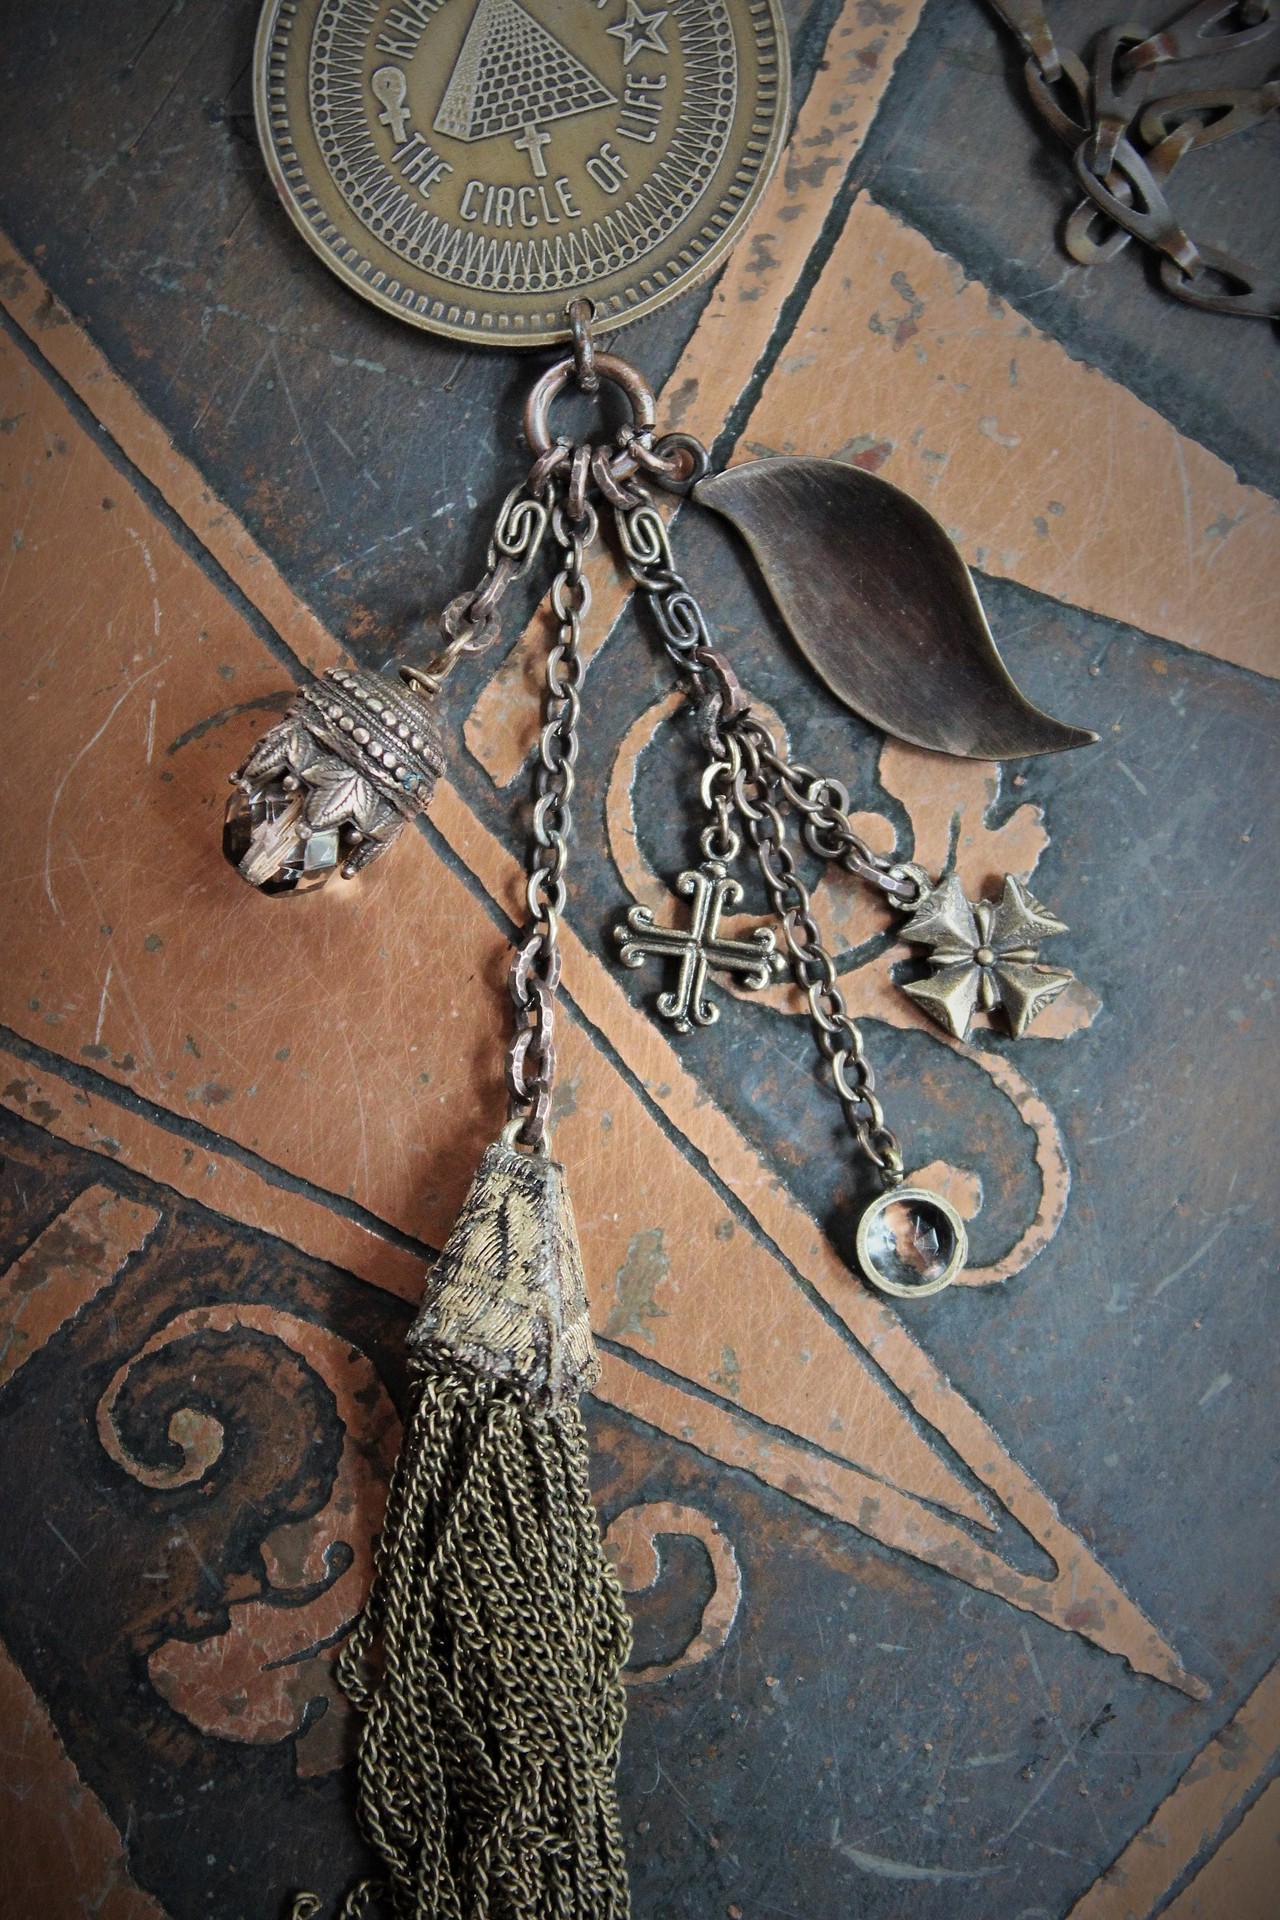 The Circle of Life Necklace w/Vintage 1950's Astrological & Spiritual Medal,Antique Clock Chain,Unique Chain Tassel+ More!